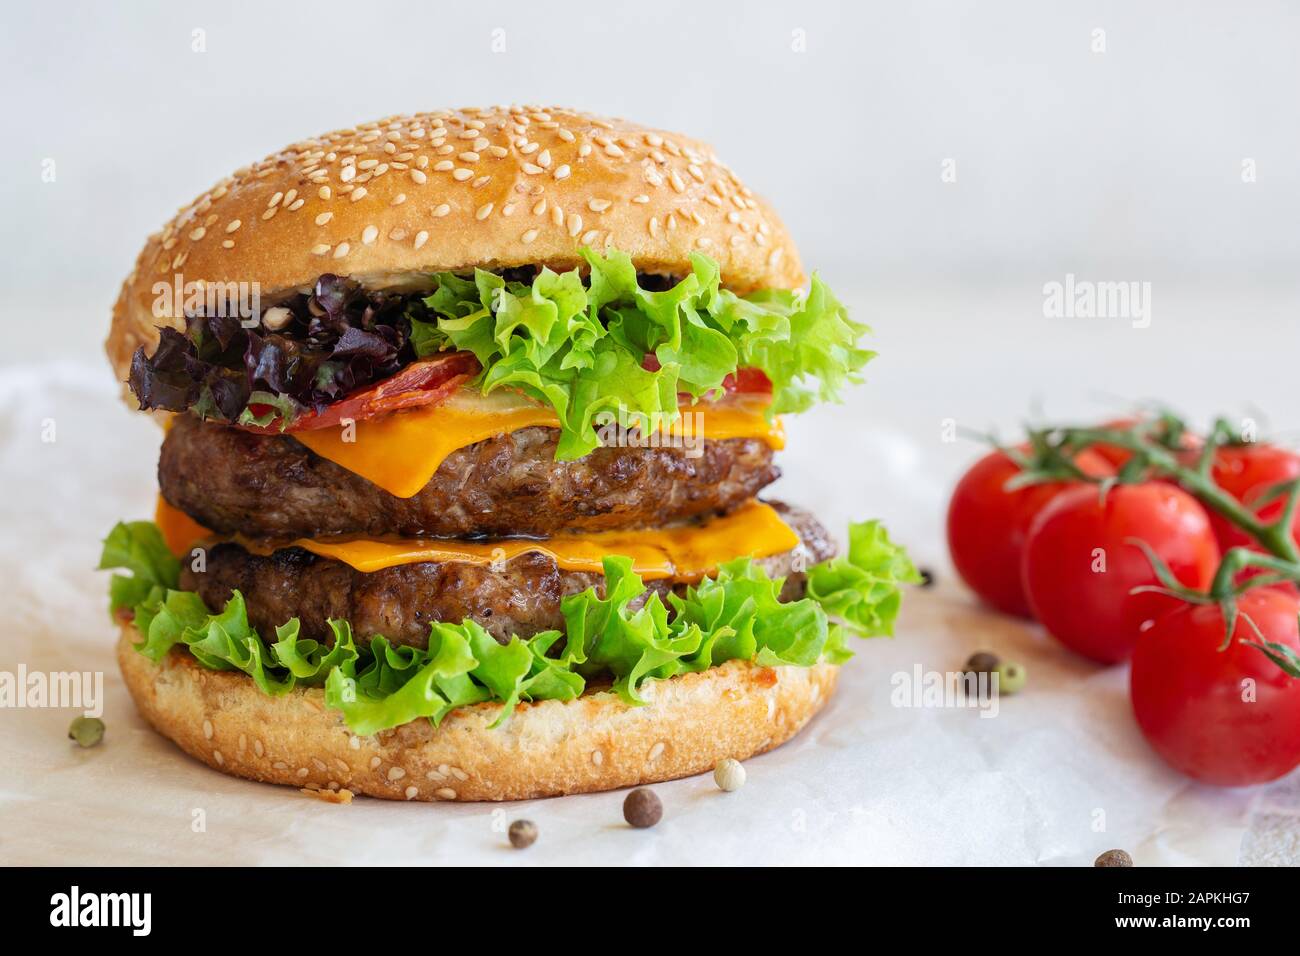 Big cheeseburger close-up on the table. Stock Photo